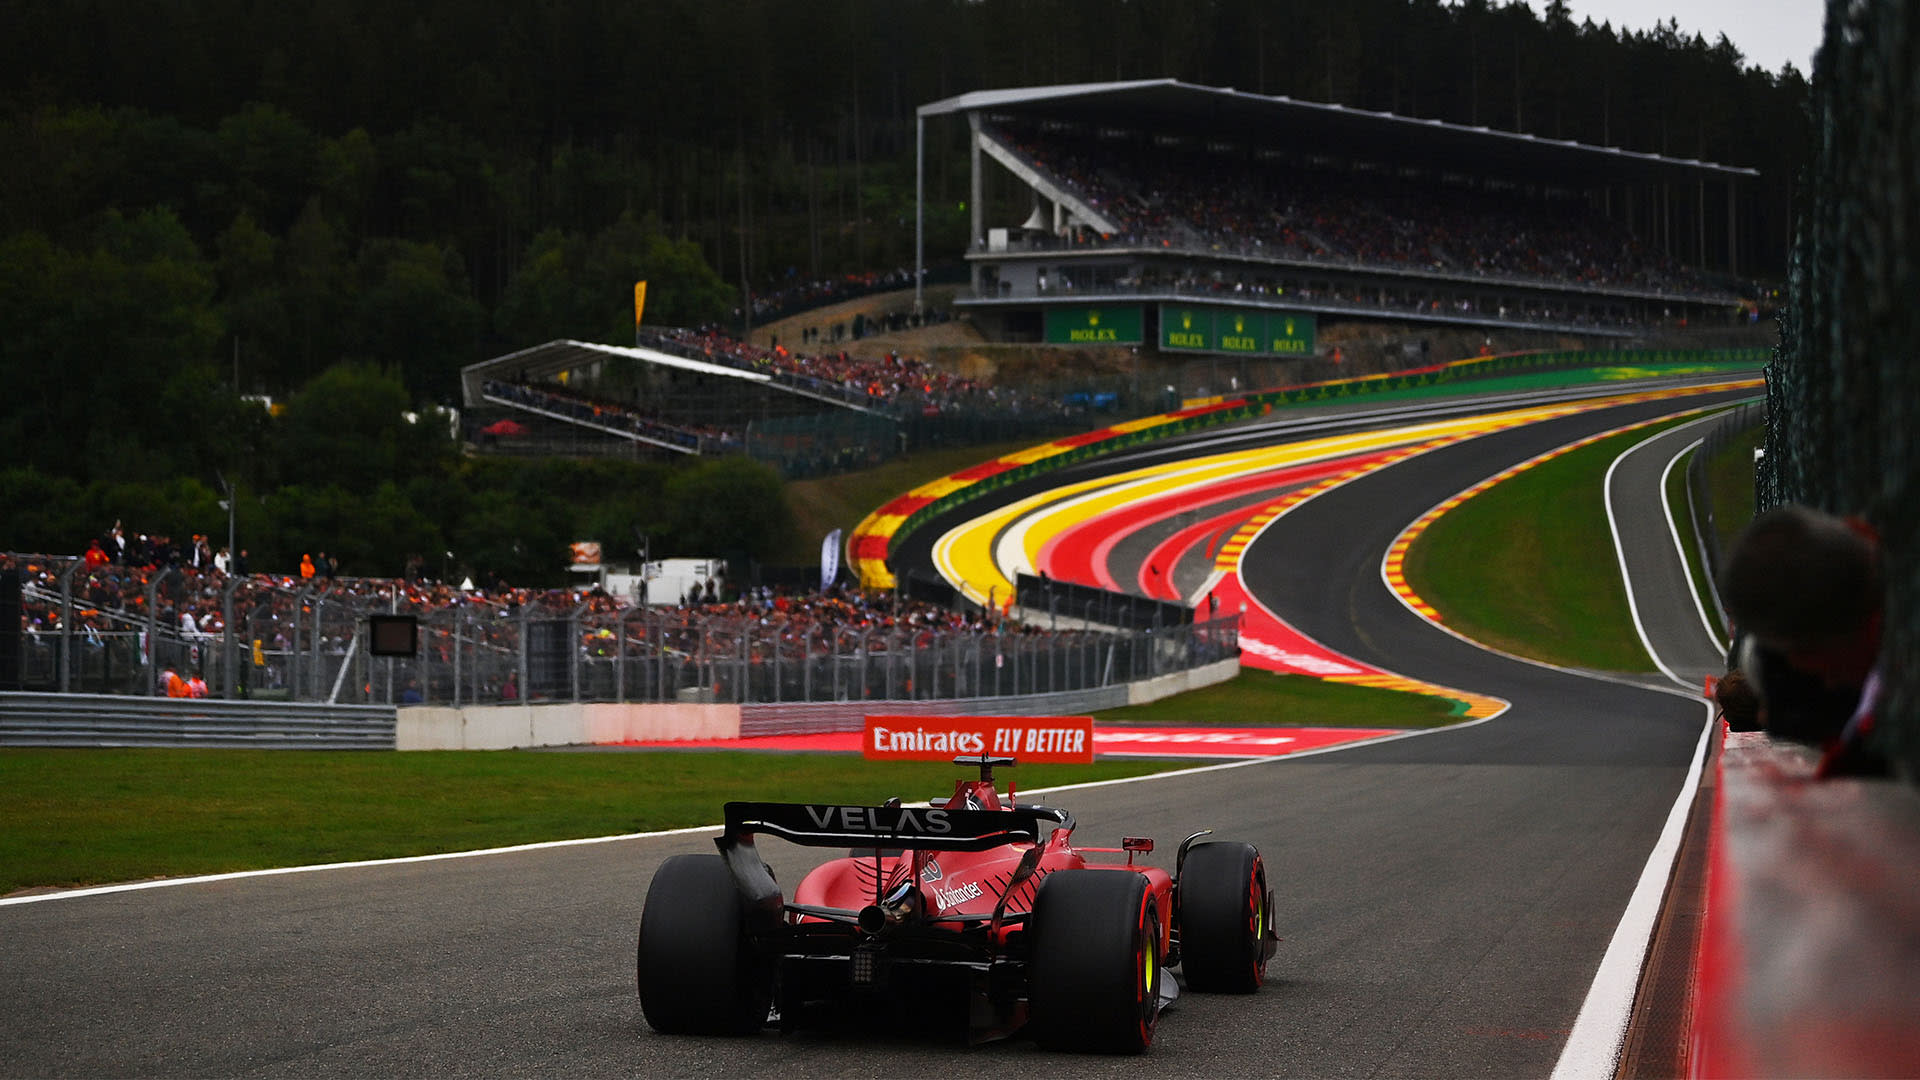 Spa to form part of 2023 F1 calendar following agreement to extend partnership Formula 1®